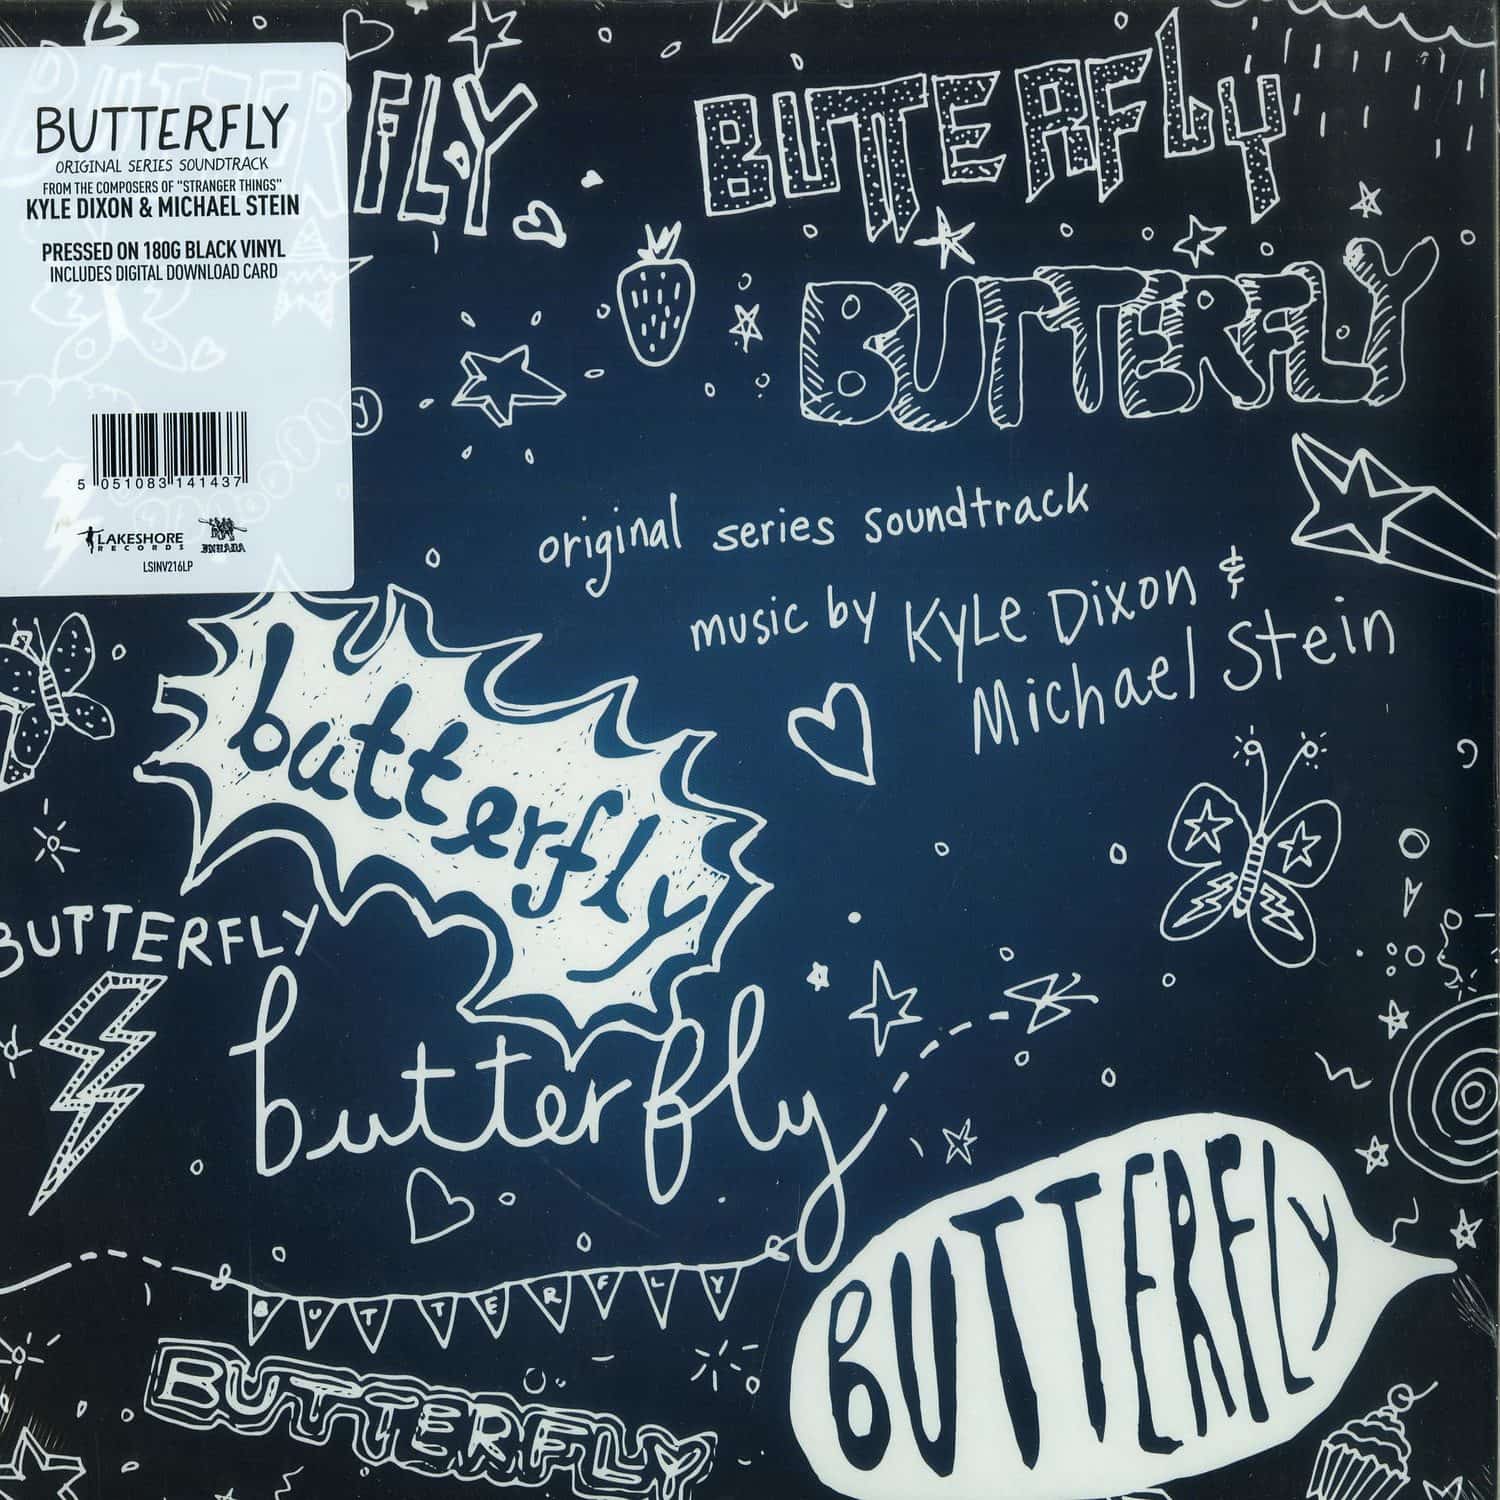 Kyle Dixon & Michael Stein - BUTTERFLY - O.S.T. 